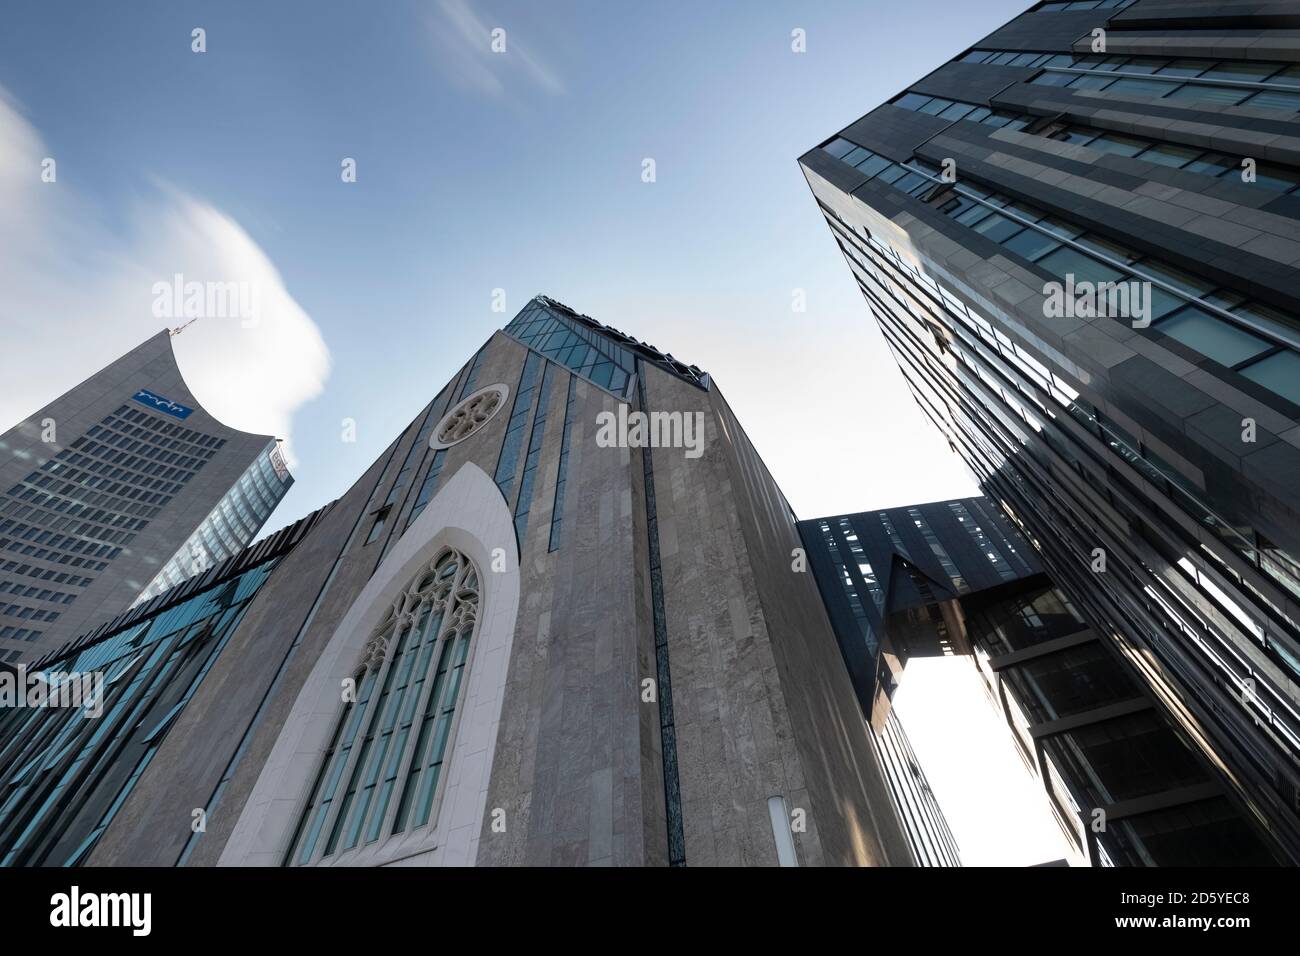 Germany, Leipzig, City-Hochhaus and university church seen from below Stock Photo